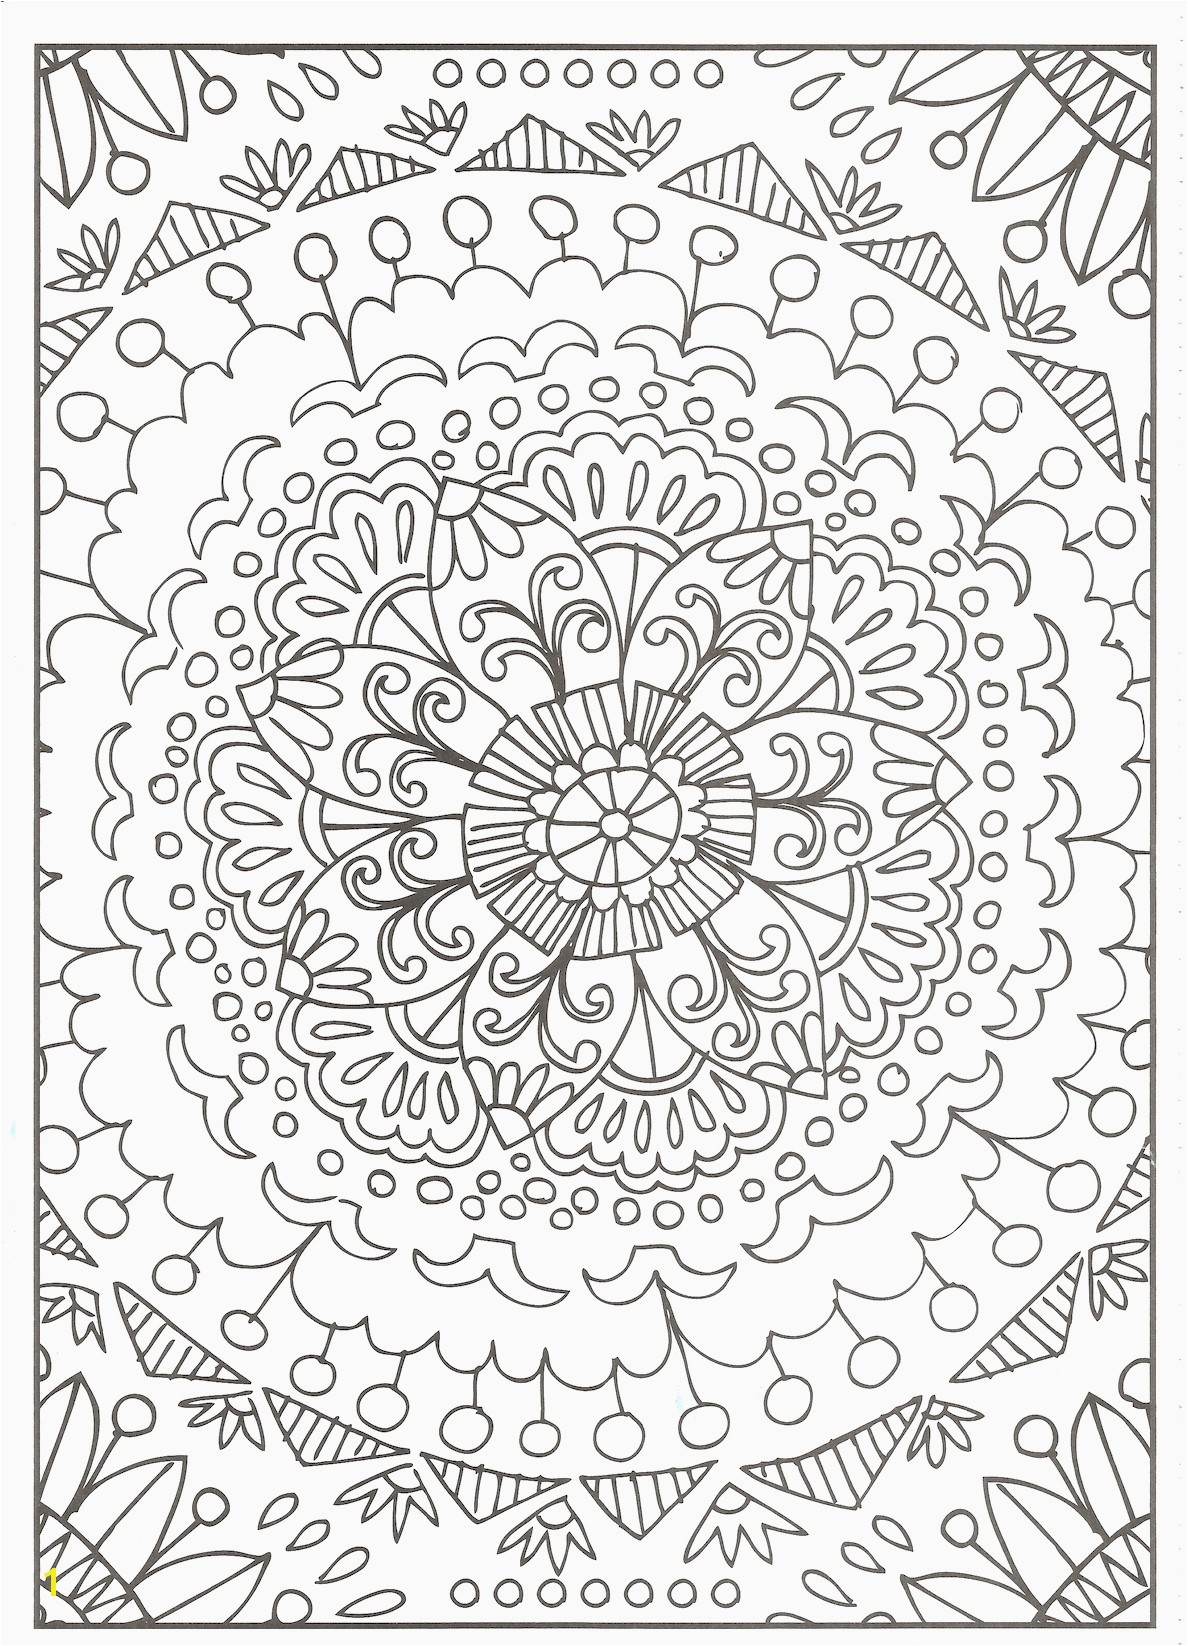 Free Printable Flower Coloring Pages for Adults Inspirational Cool Vases Flower Vase Coloring Page Pages Flowers